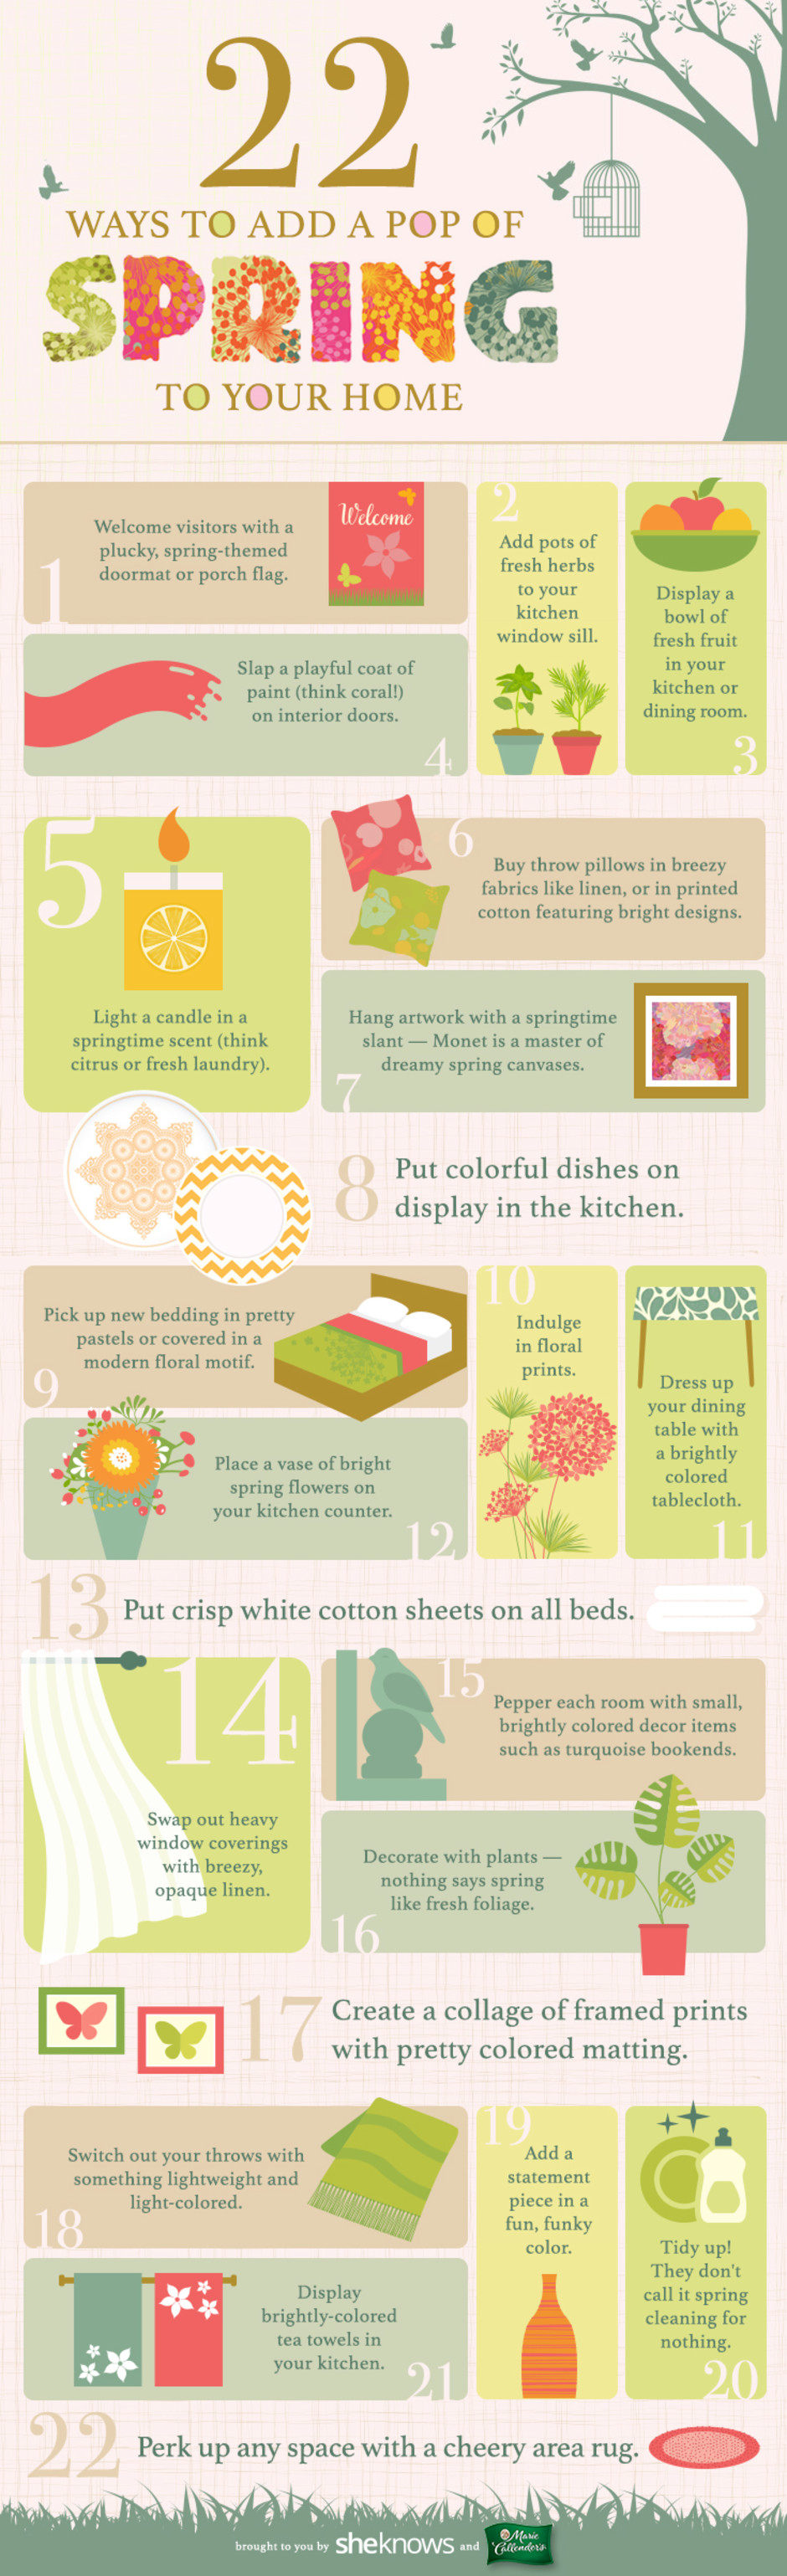 Ways to bring spring into your home